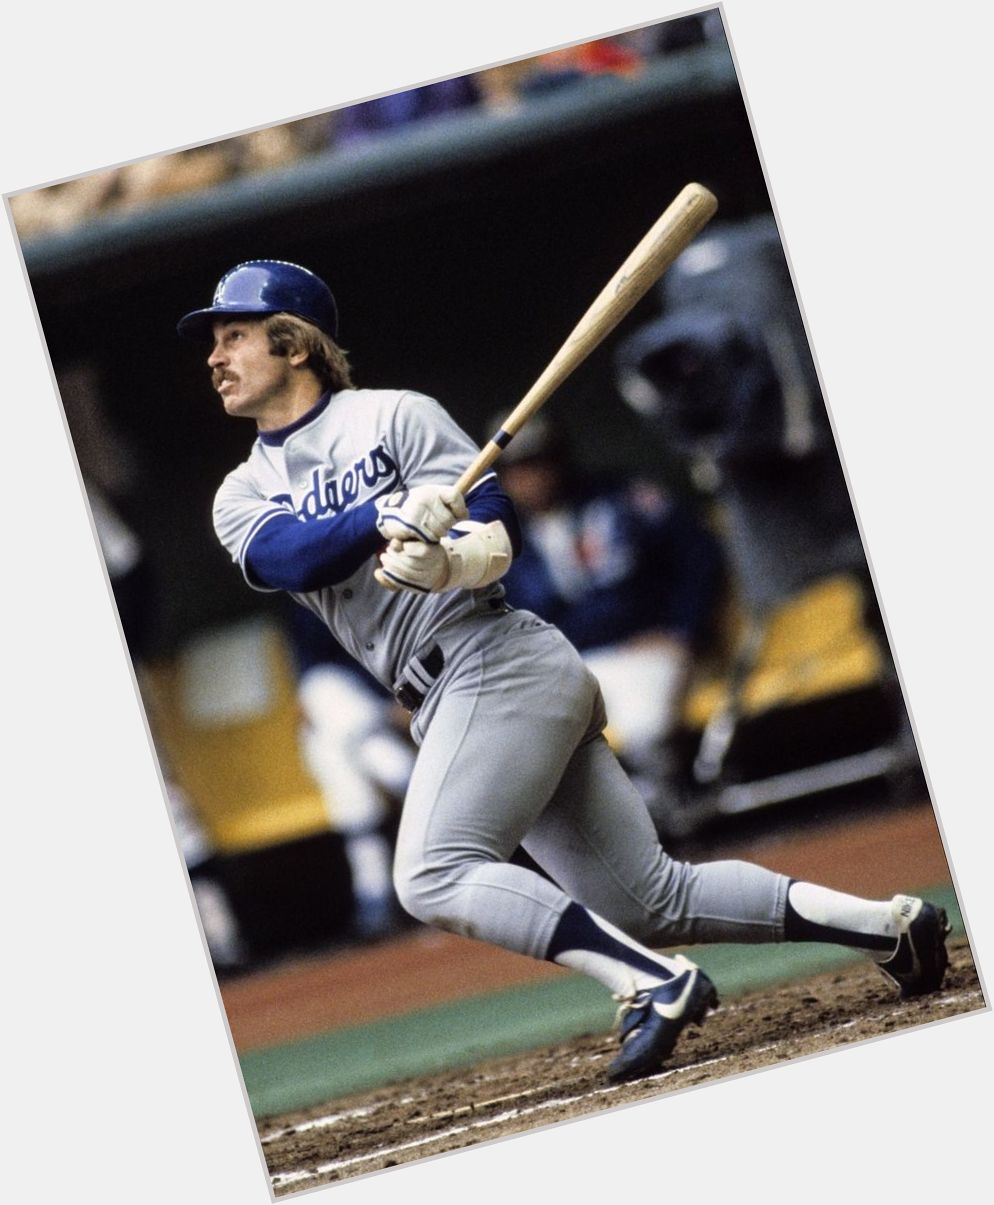 Happy Birthday to \The Penguin\, Ron Cey, 6-time All-Star 3B; 316 career HR, \81 WS MVP   